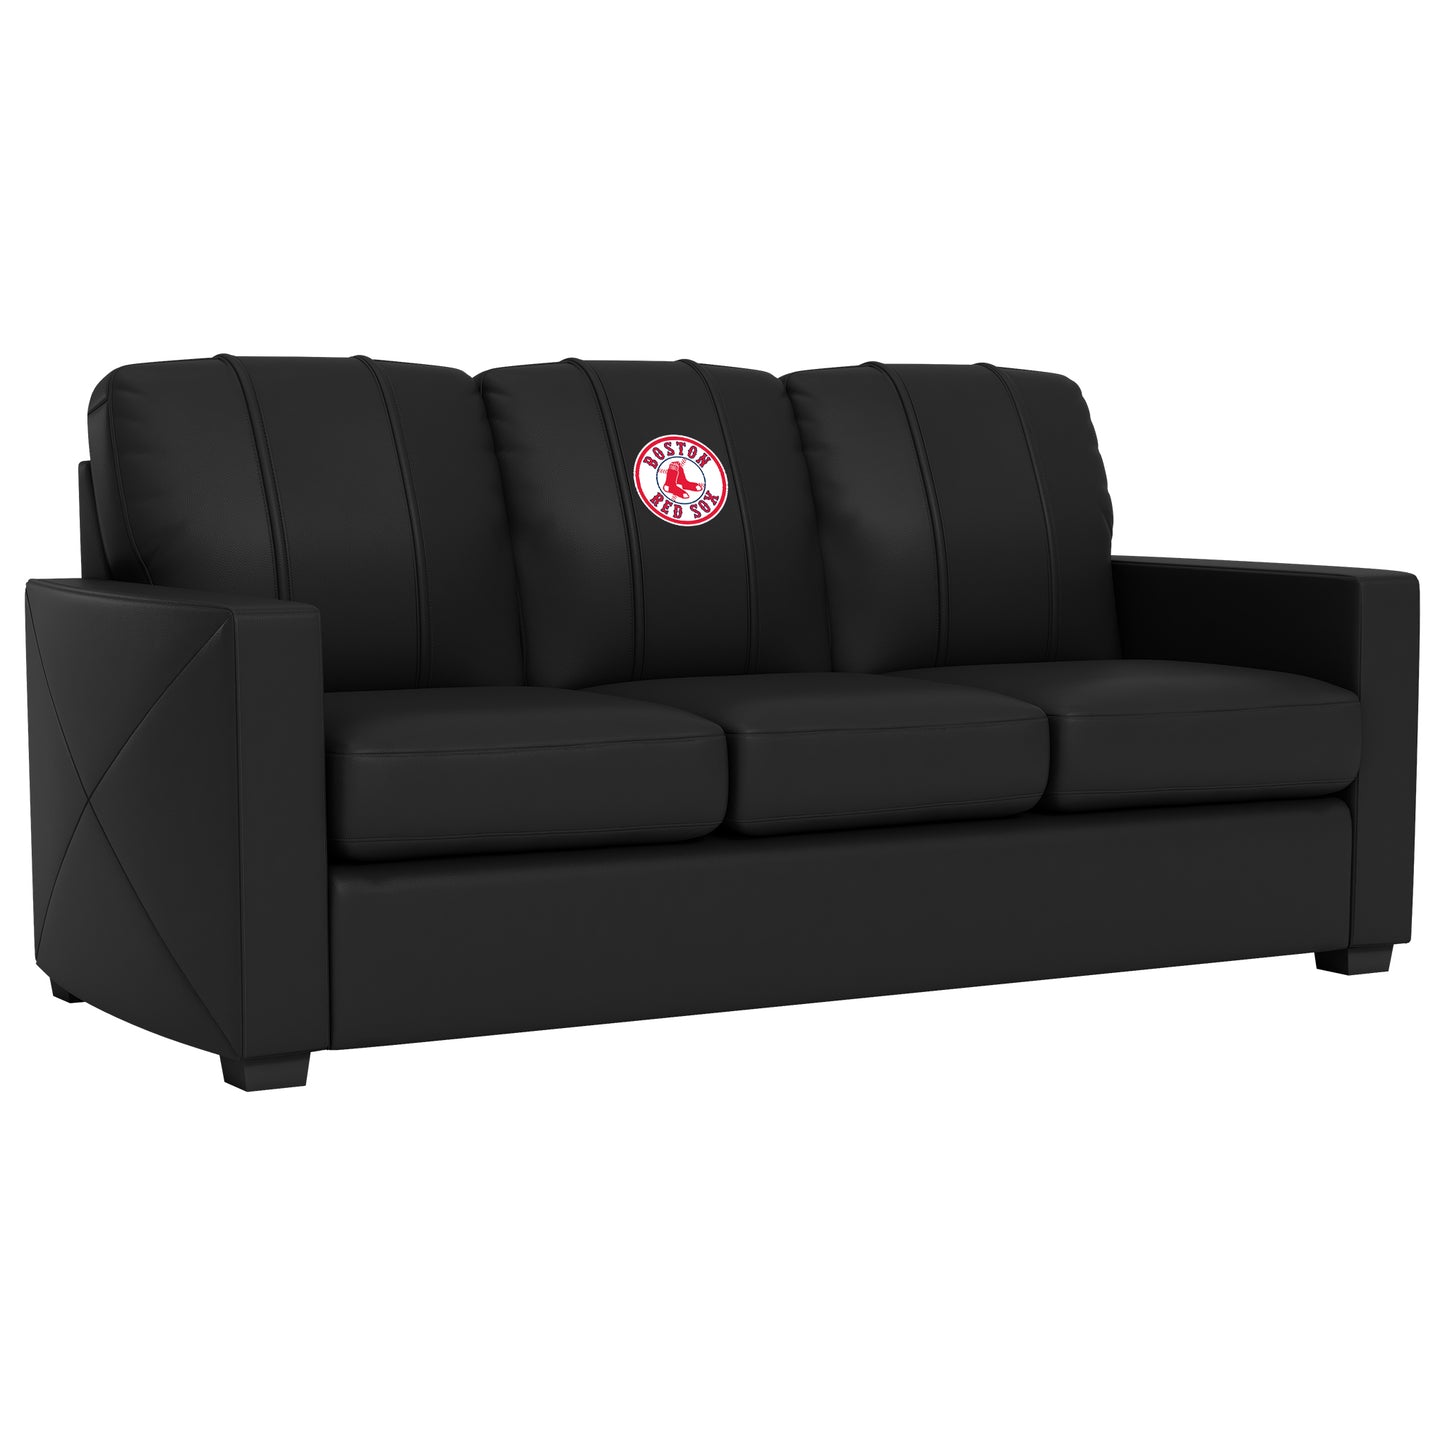 Silver Sofa with Boston Red Sox Logo